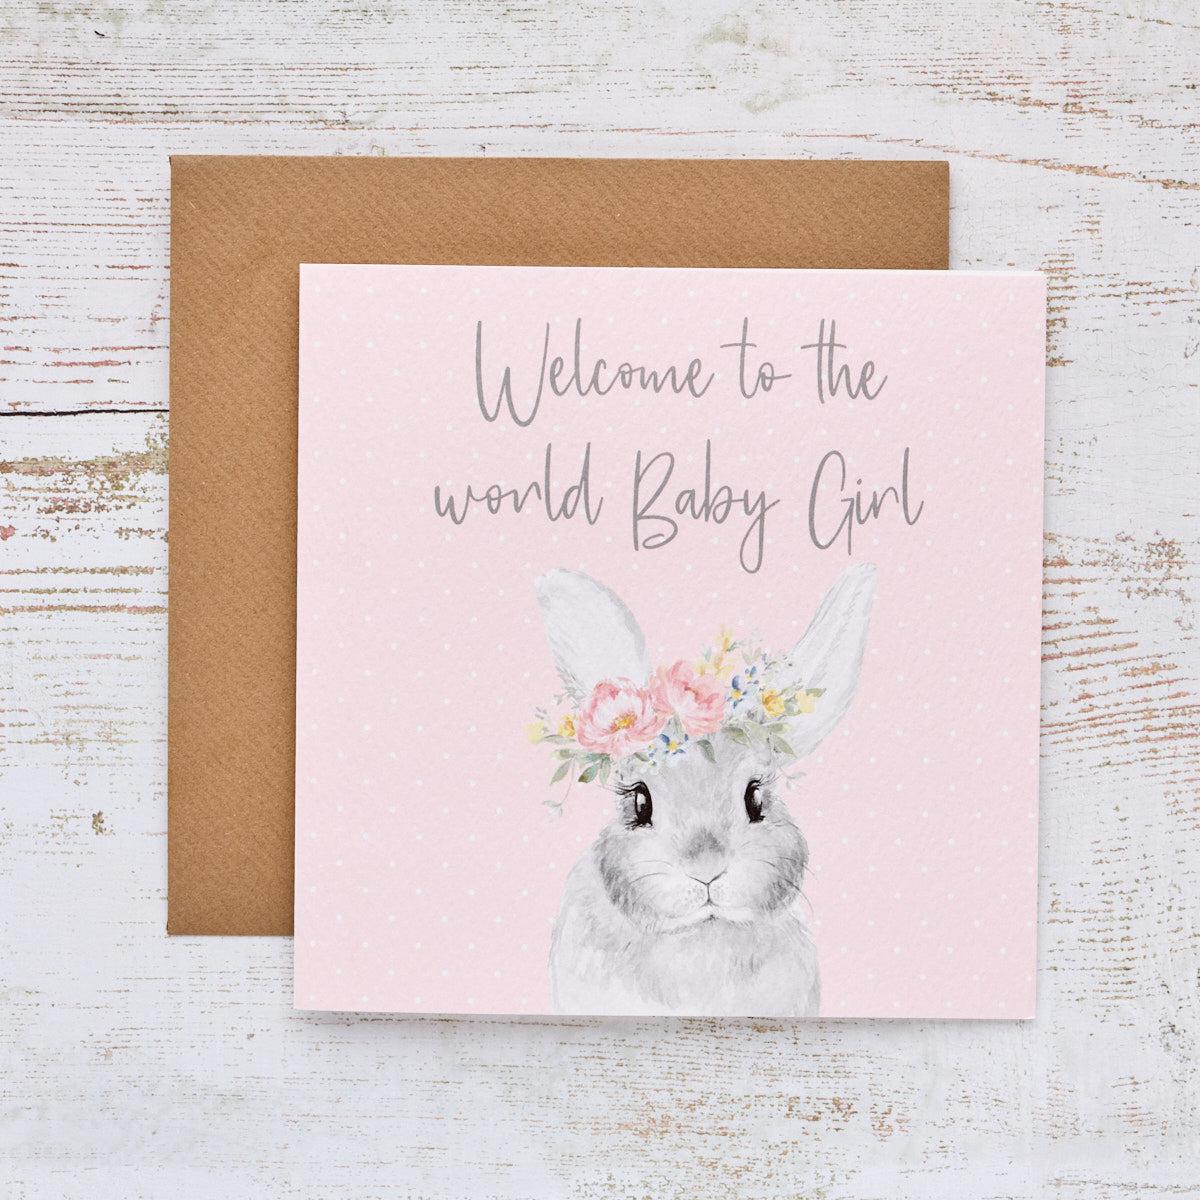 Greeting Card: “Welcome To The World Baby Girl”-Breda's Gift Shop